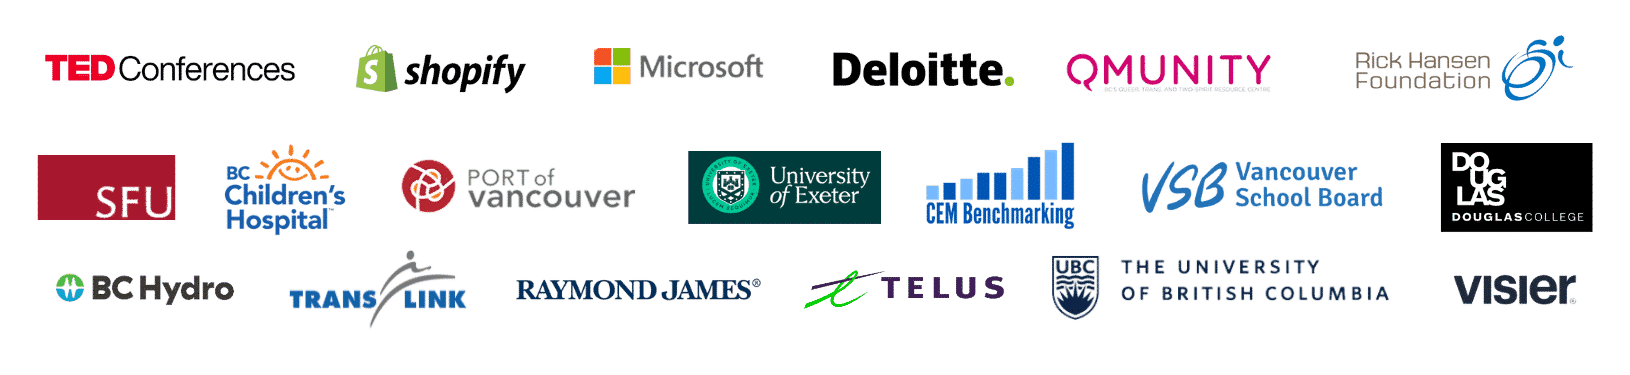 Who we've worked with: Ted Conferences, Shopify, Microsoft, Qmunity, Deloitte, Visier, Telus, Douglas College, University of British Columbia, SFU, BC Children's Hospital, Port of Vancouver, BC Hydro, Translink